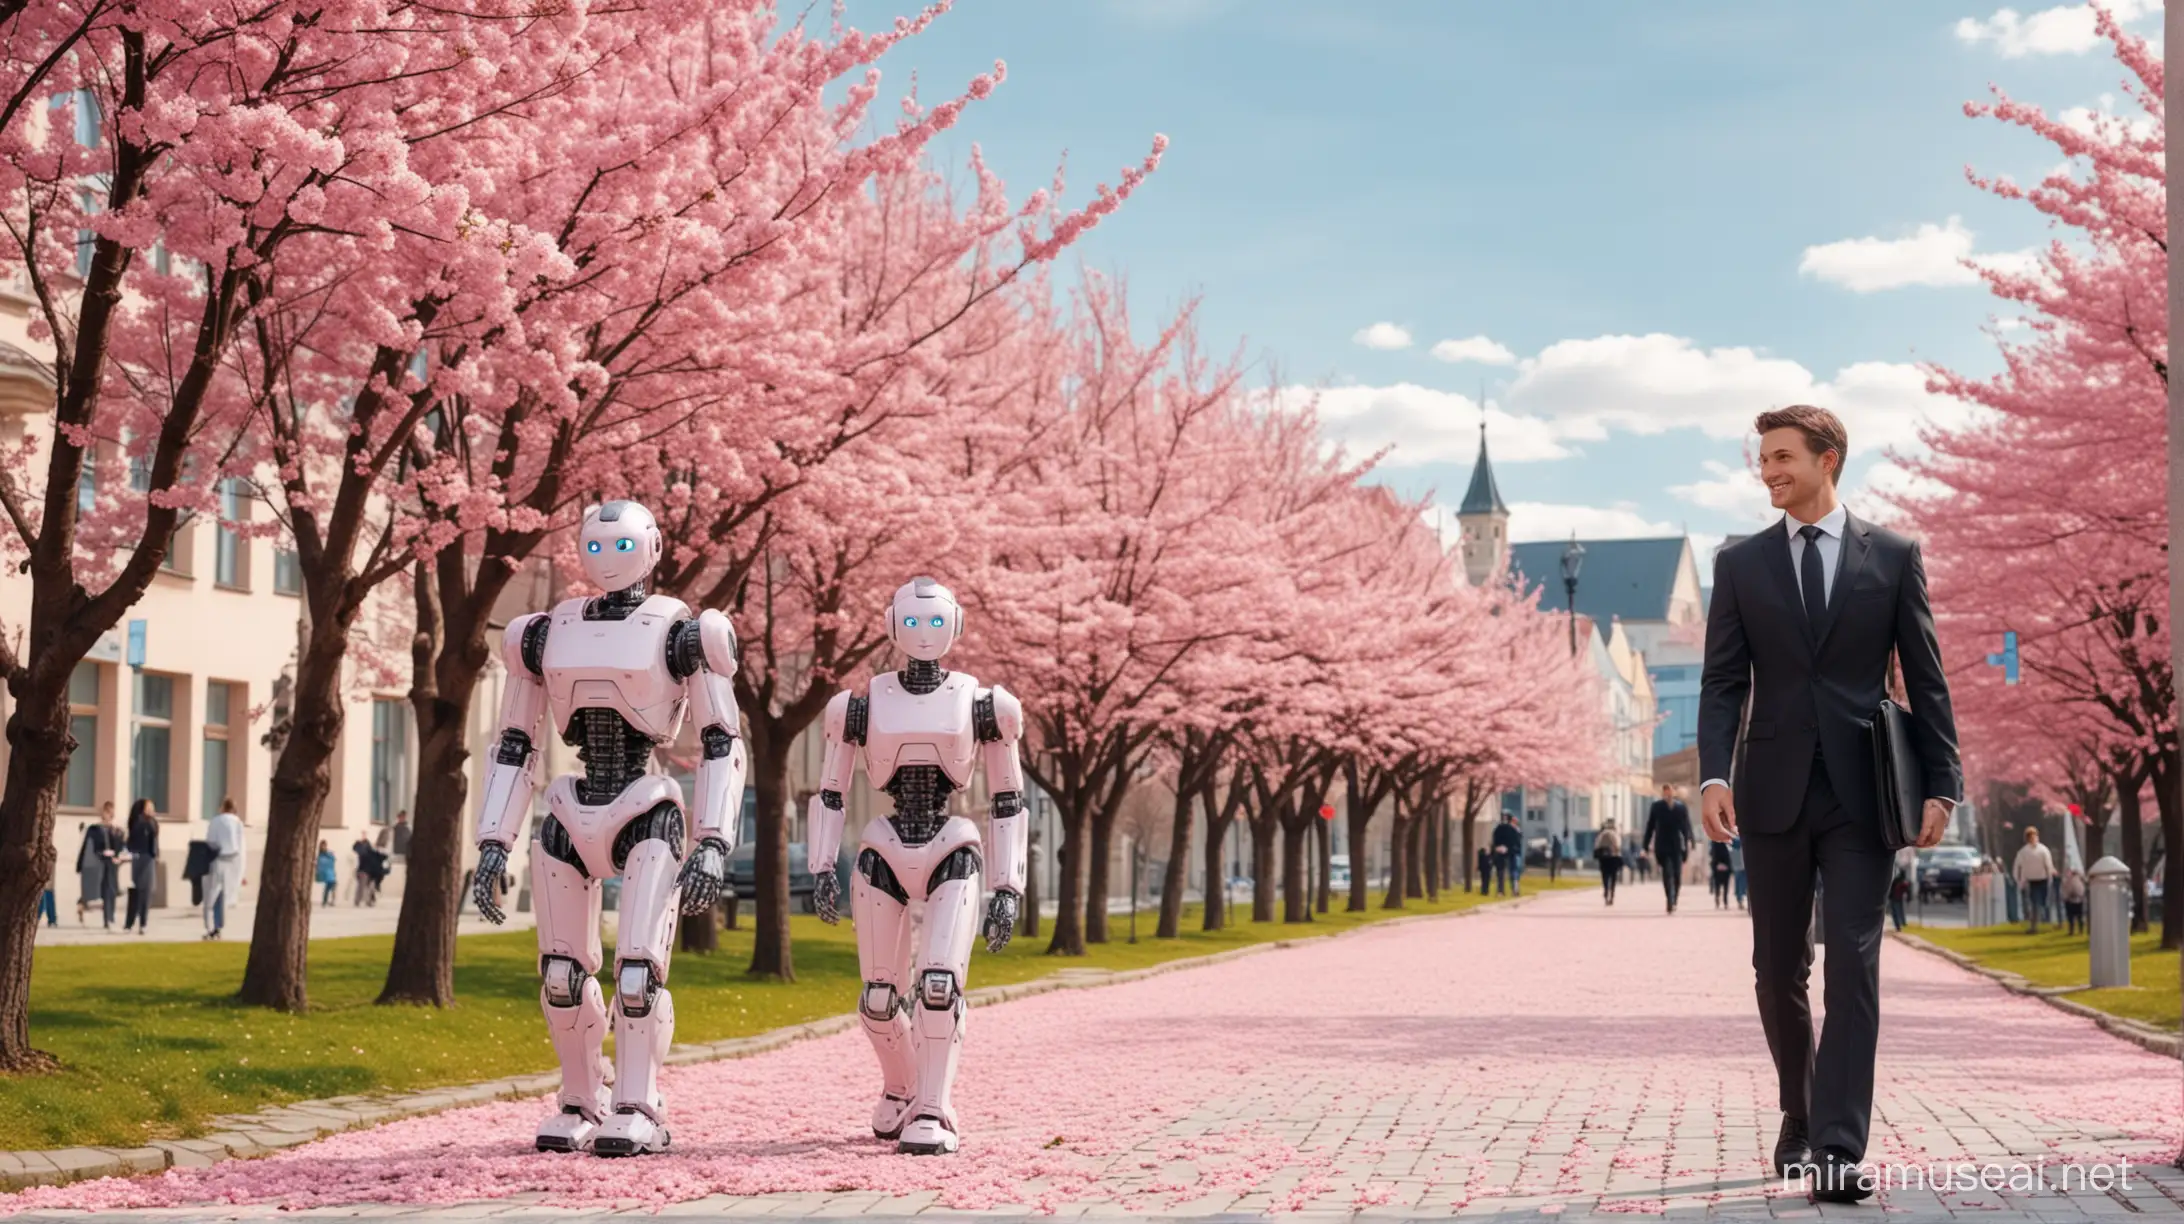  friendly artifficial intelligence robots and lawyers walking down together, smiling, in the Vilnius, Lithuania, on a sunny day, pink sacuras trees are blooming alongside, realistic photo